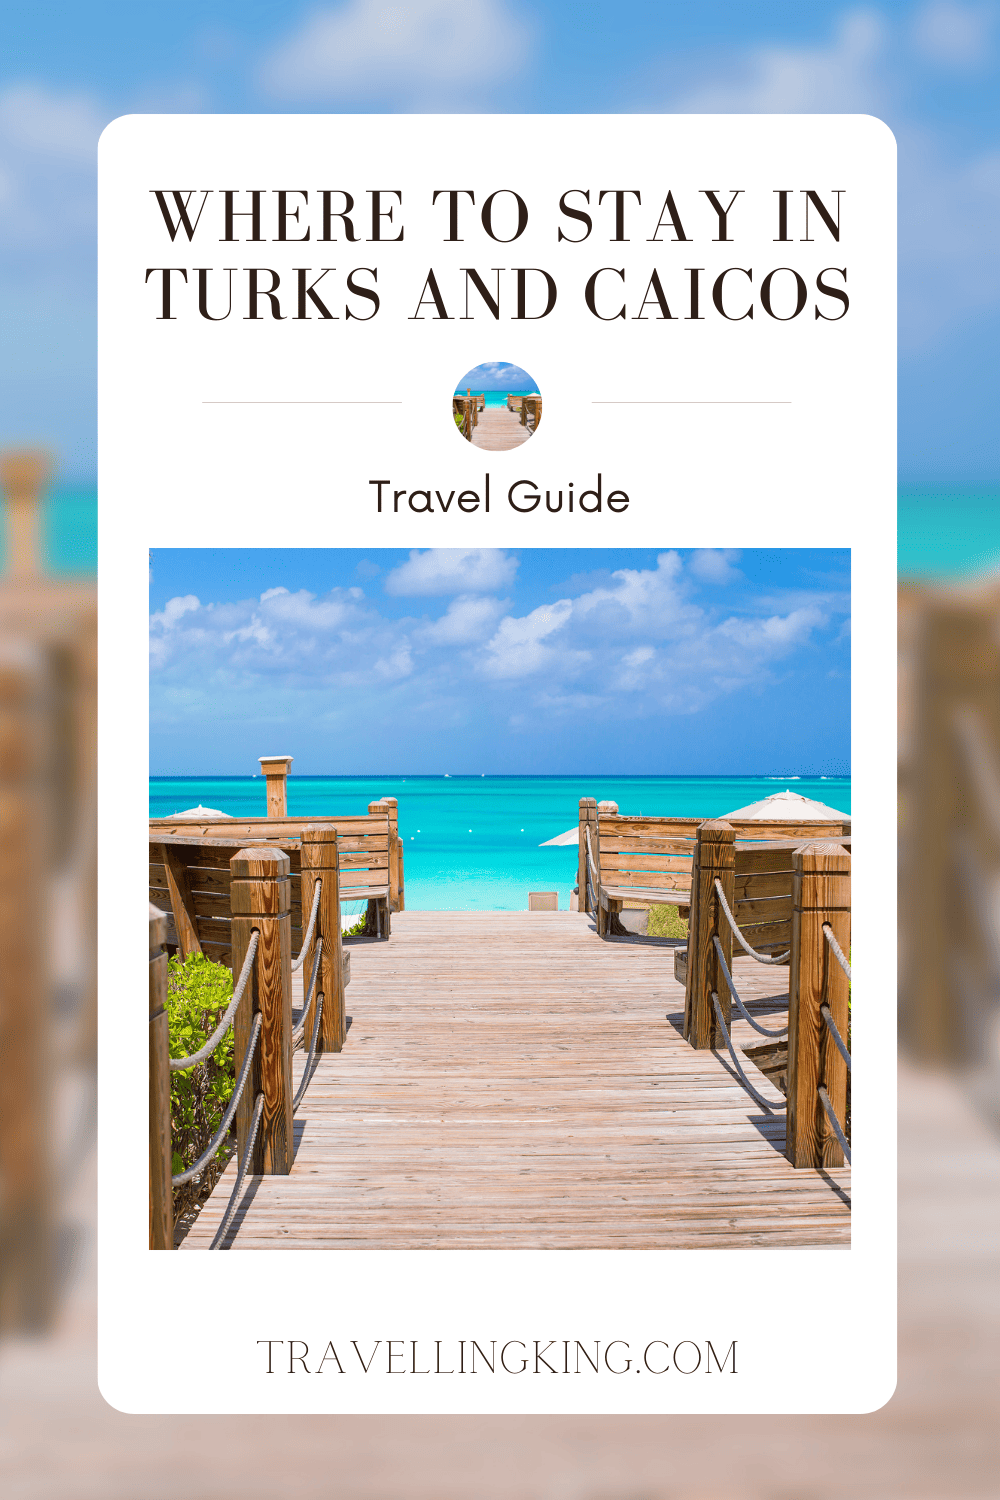 Where to stay in Turks and Caicos